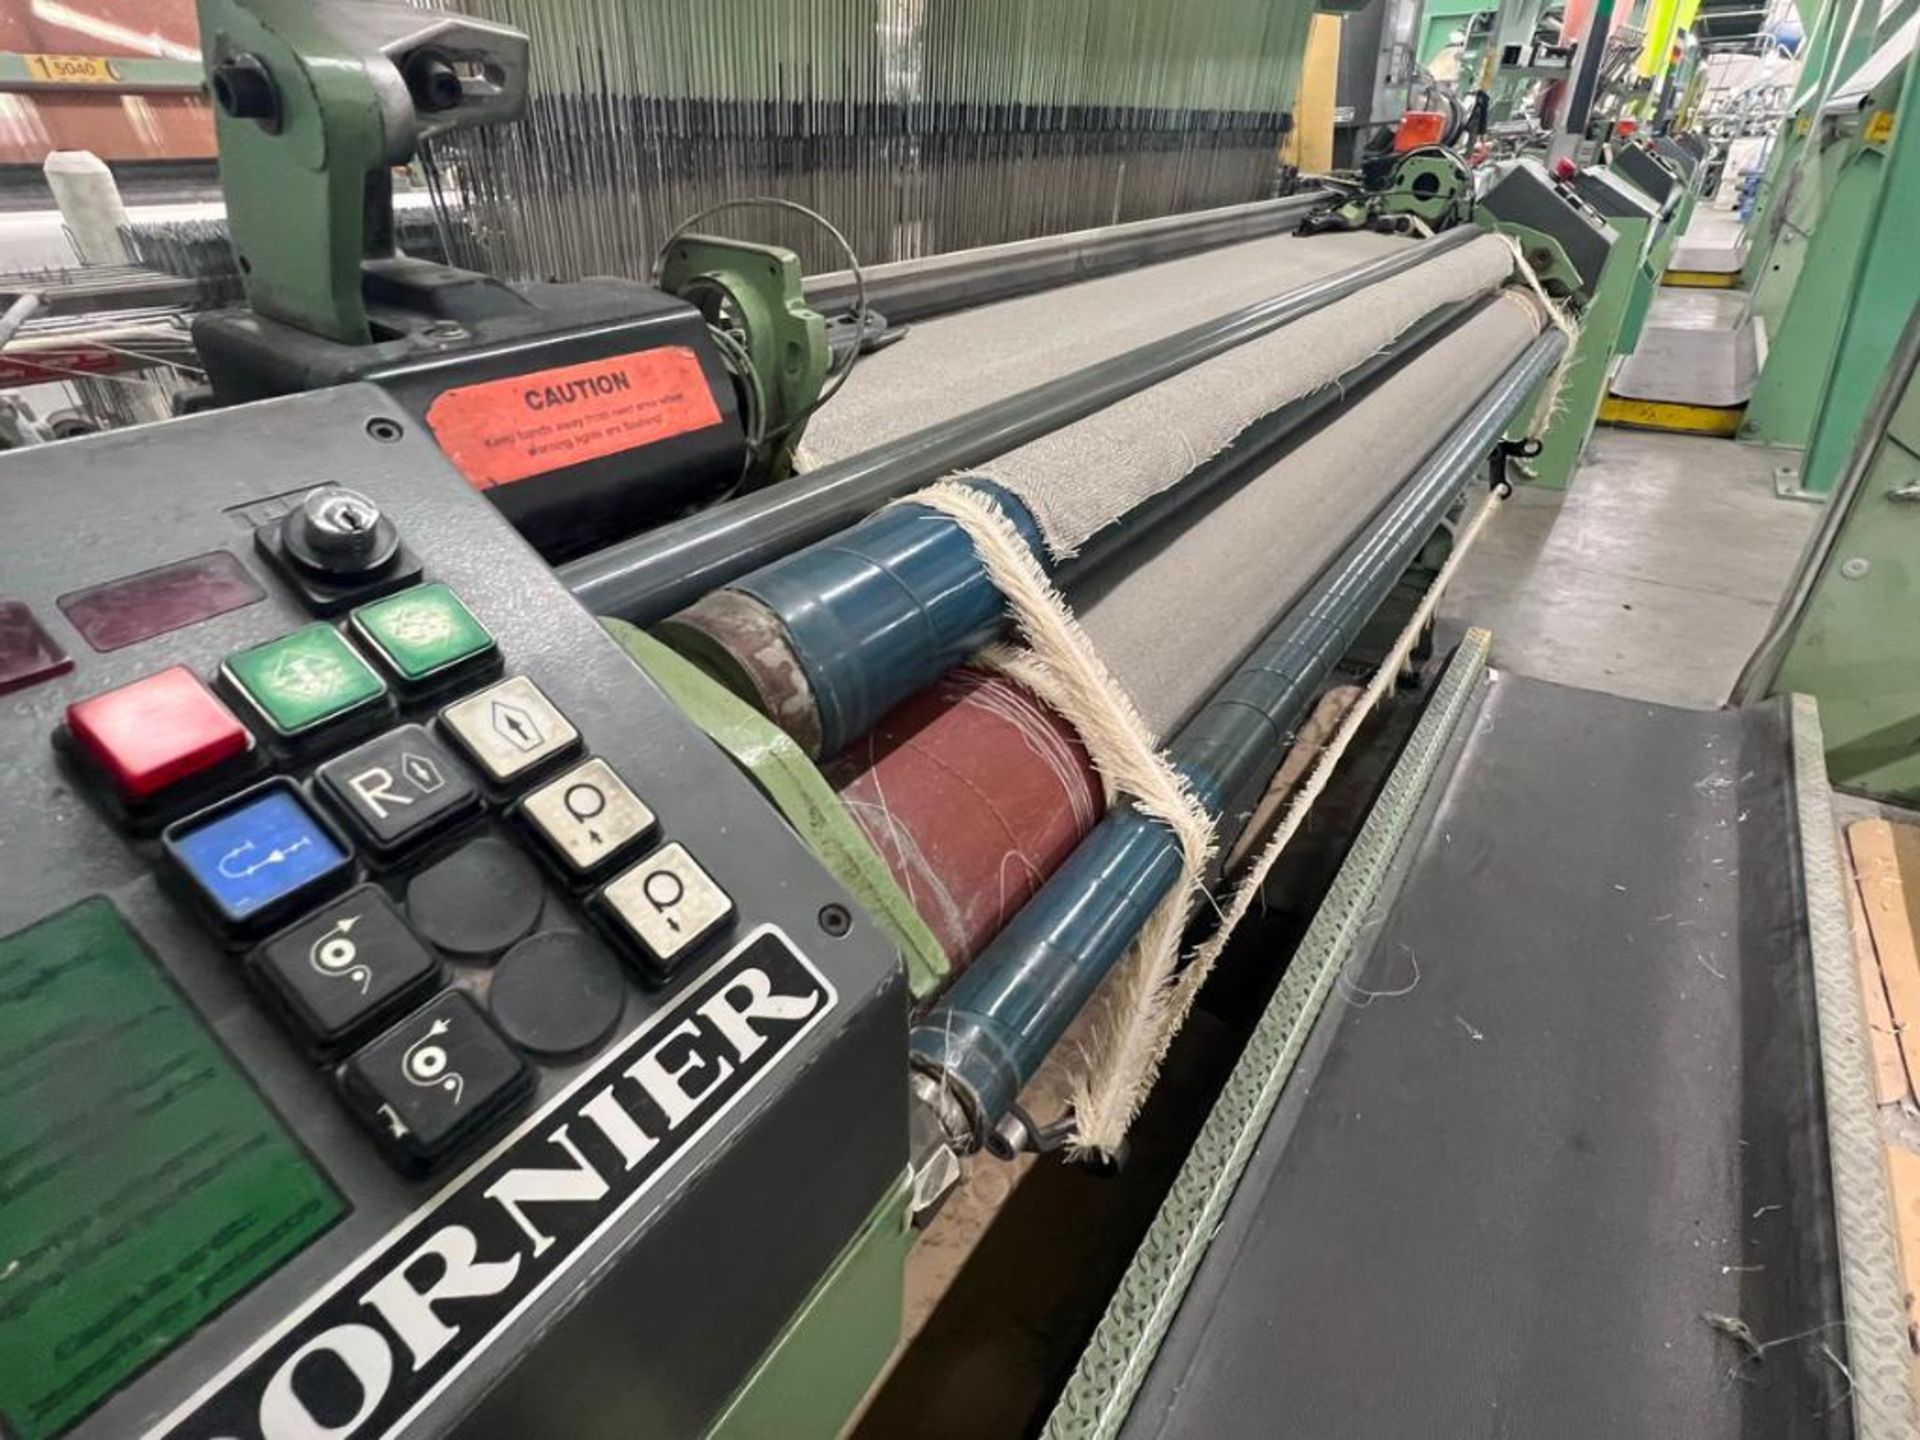 1997 Dornier 210 cm Jacquard Rapier Loom, Model HTVS 8/J, S/N 38460 - Equipped with 8 Colors, 4 Feed - Image 8 of 14